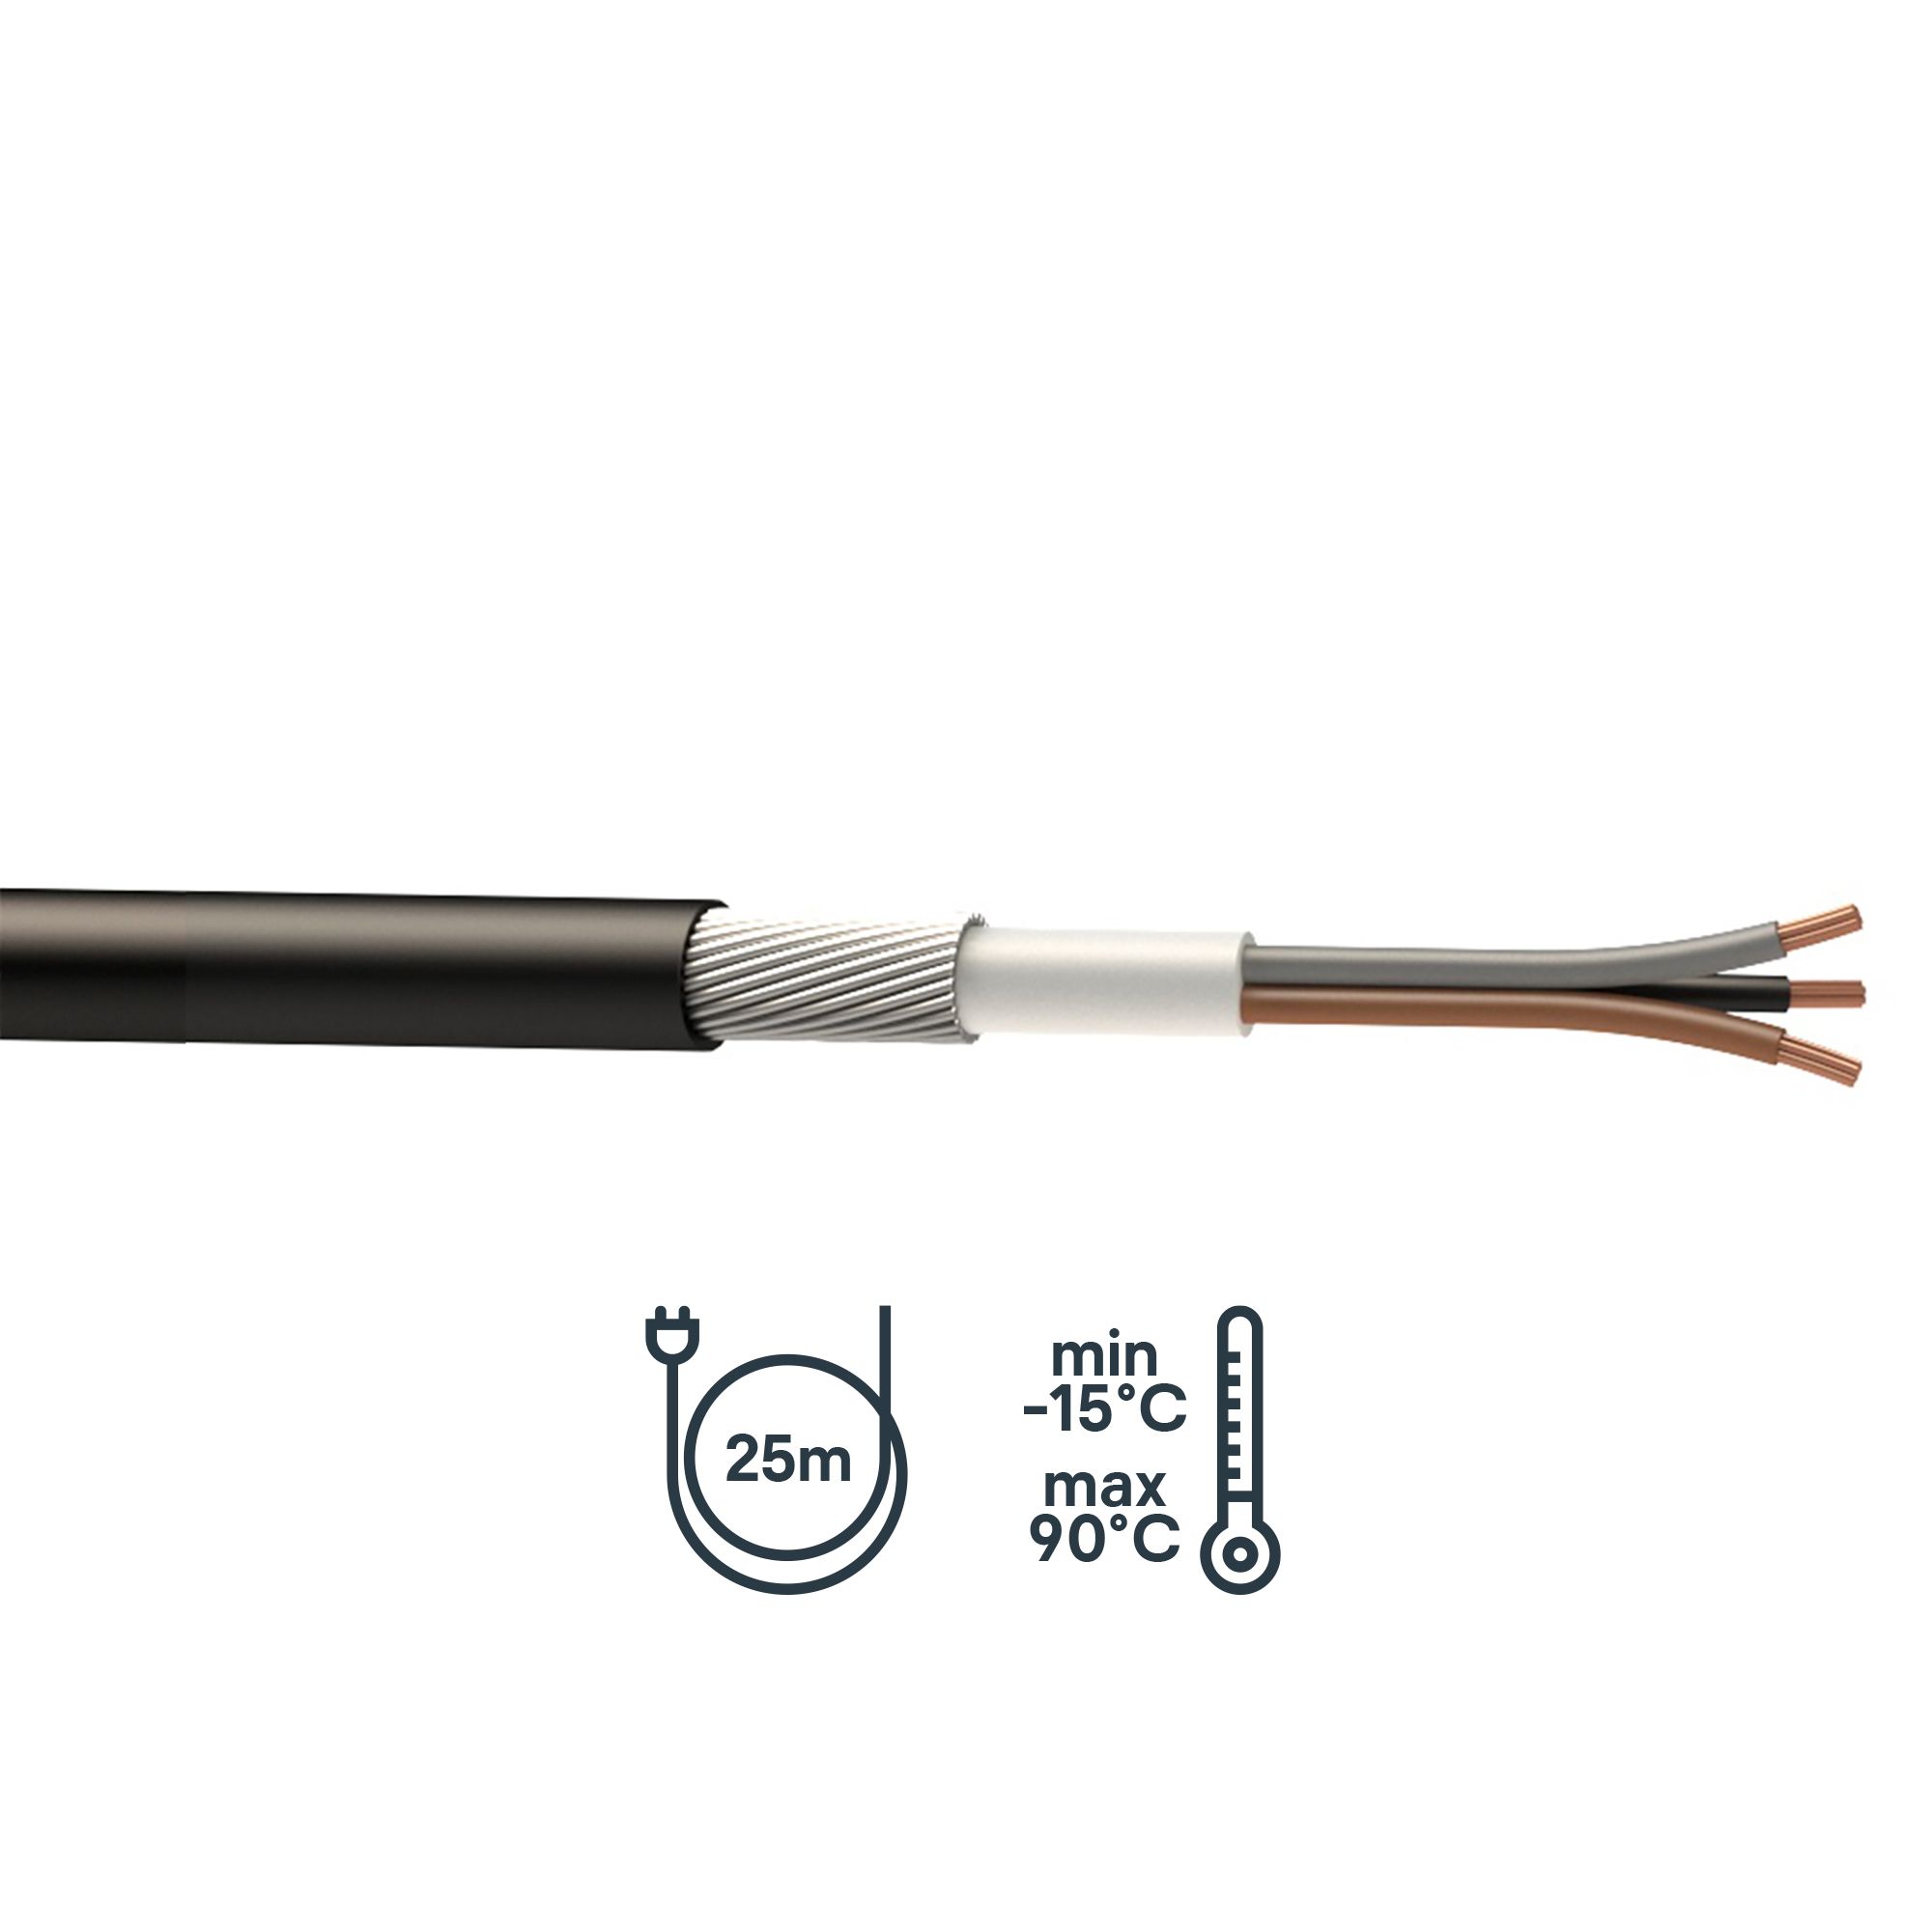 Prysmian Black 3-core Armoured Cable 1.5mm² x 25m